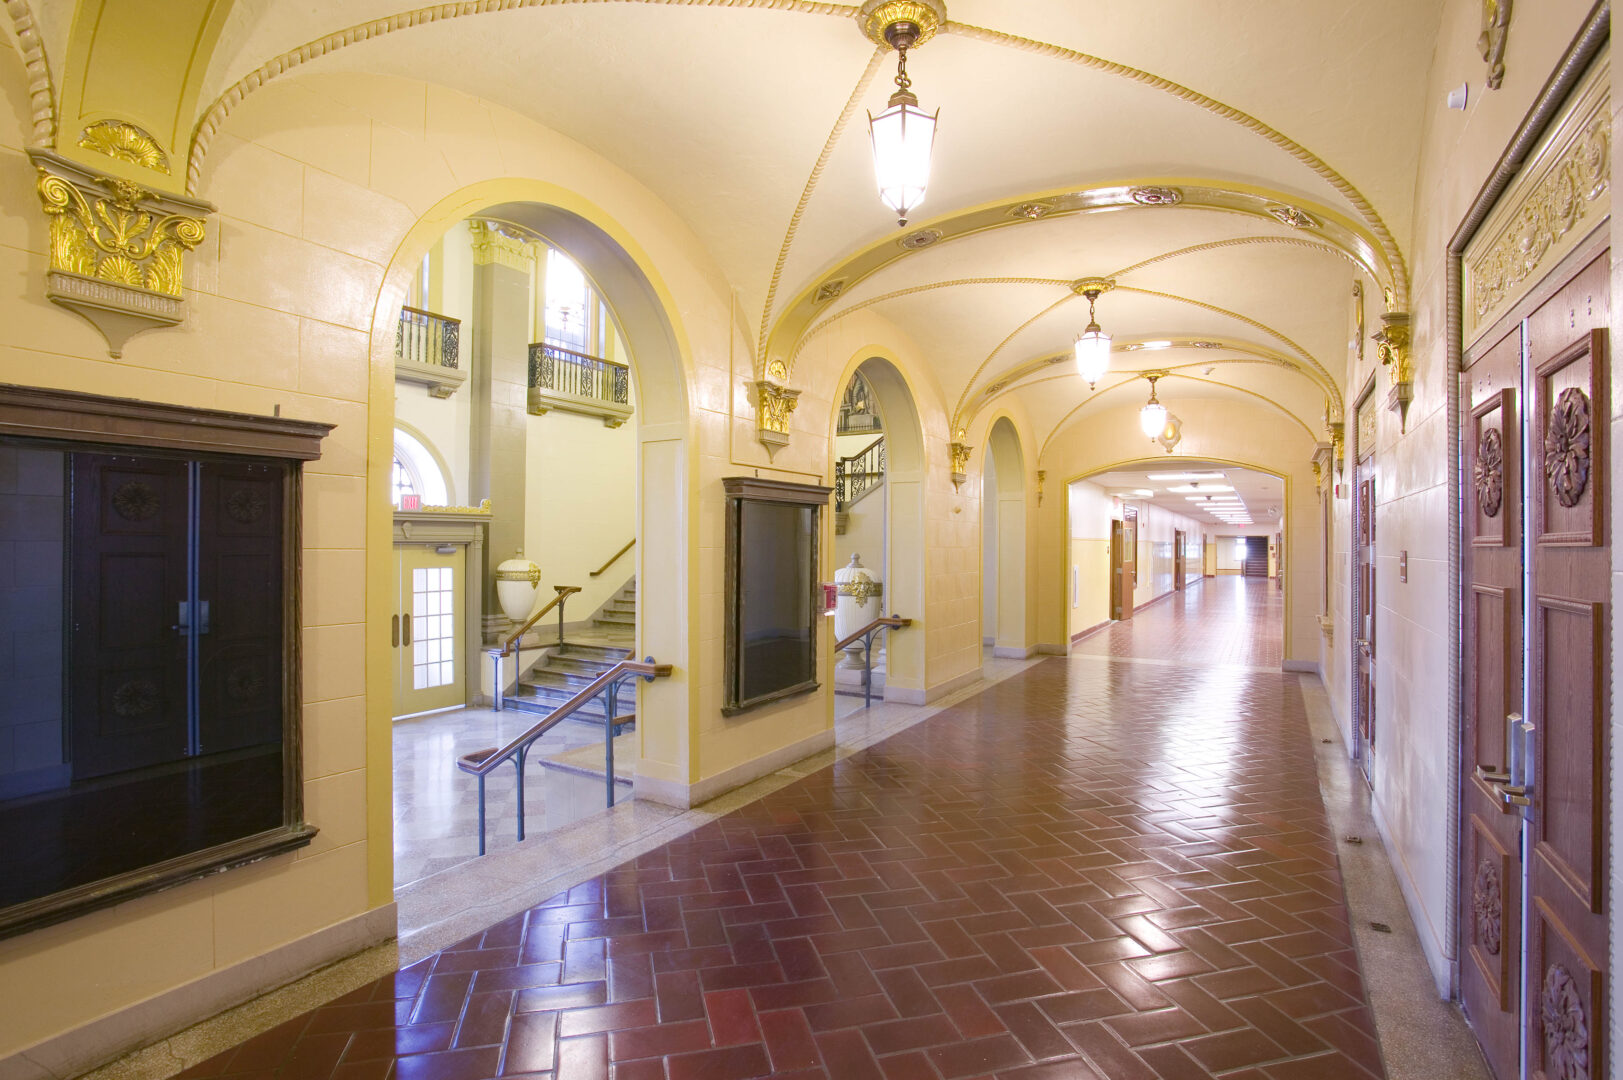 Lobby and monumental staircase adjacent to the auditorium